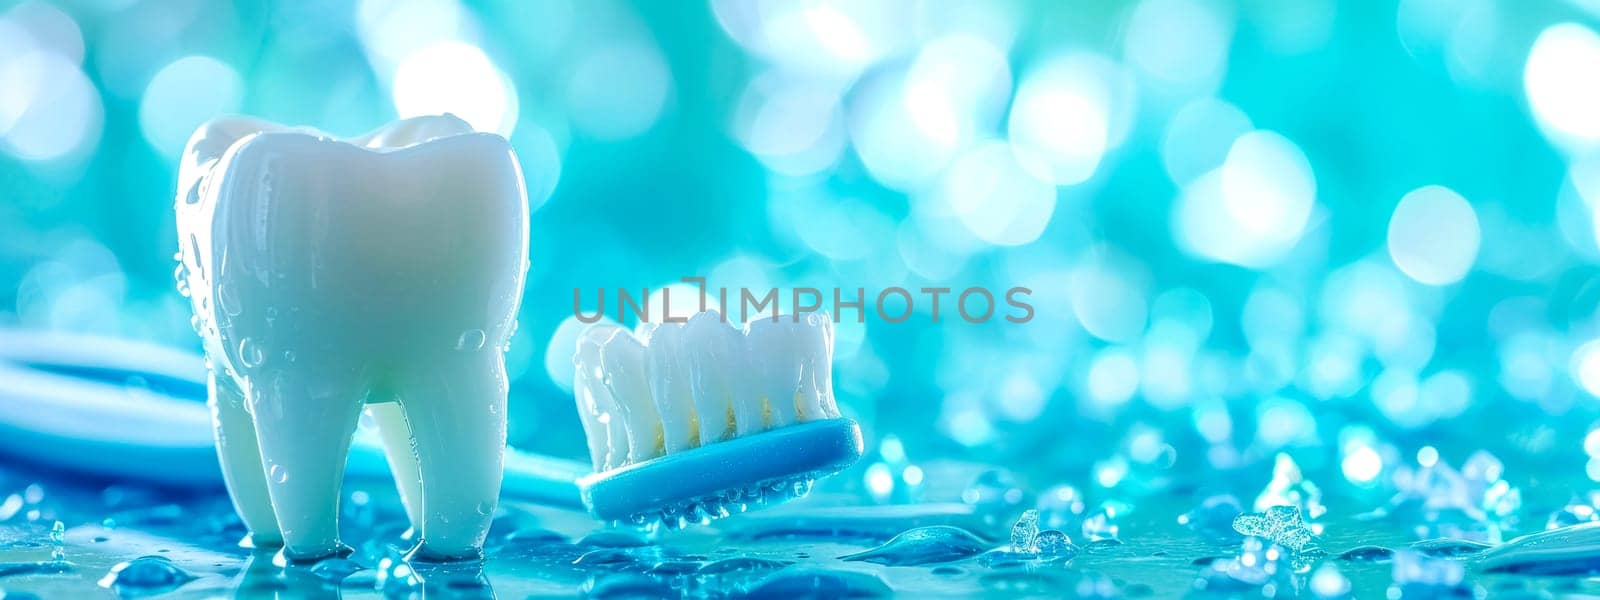 Dental care essentials highlighted with water freshness, banner with copy space by Edophoto